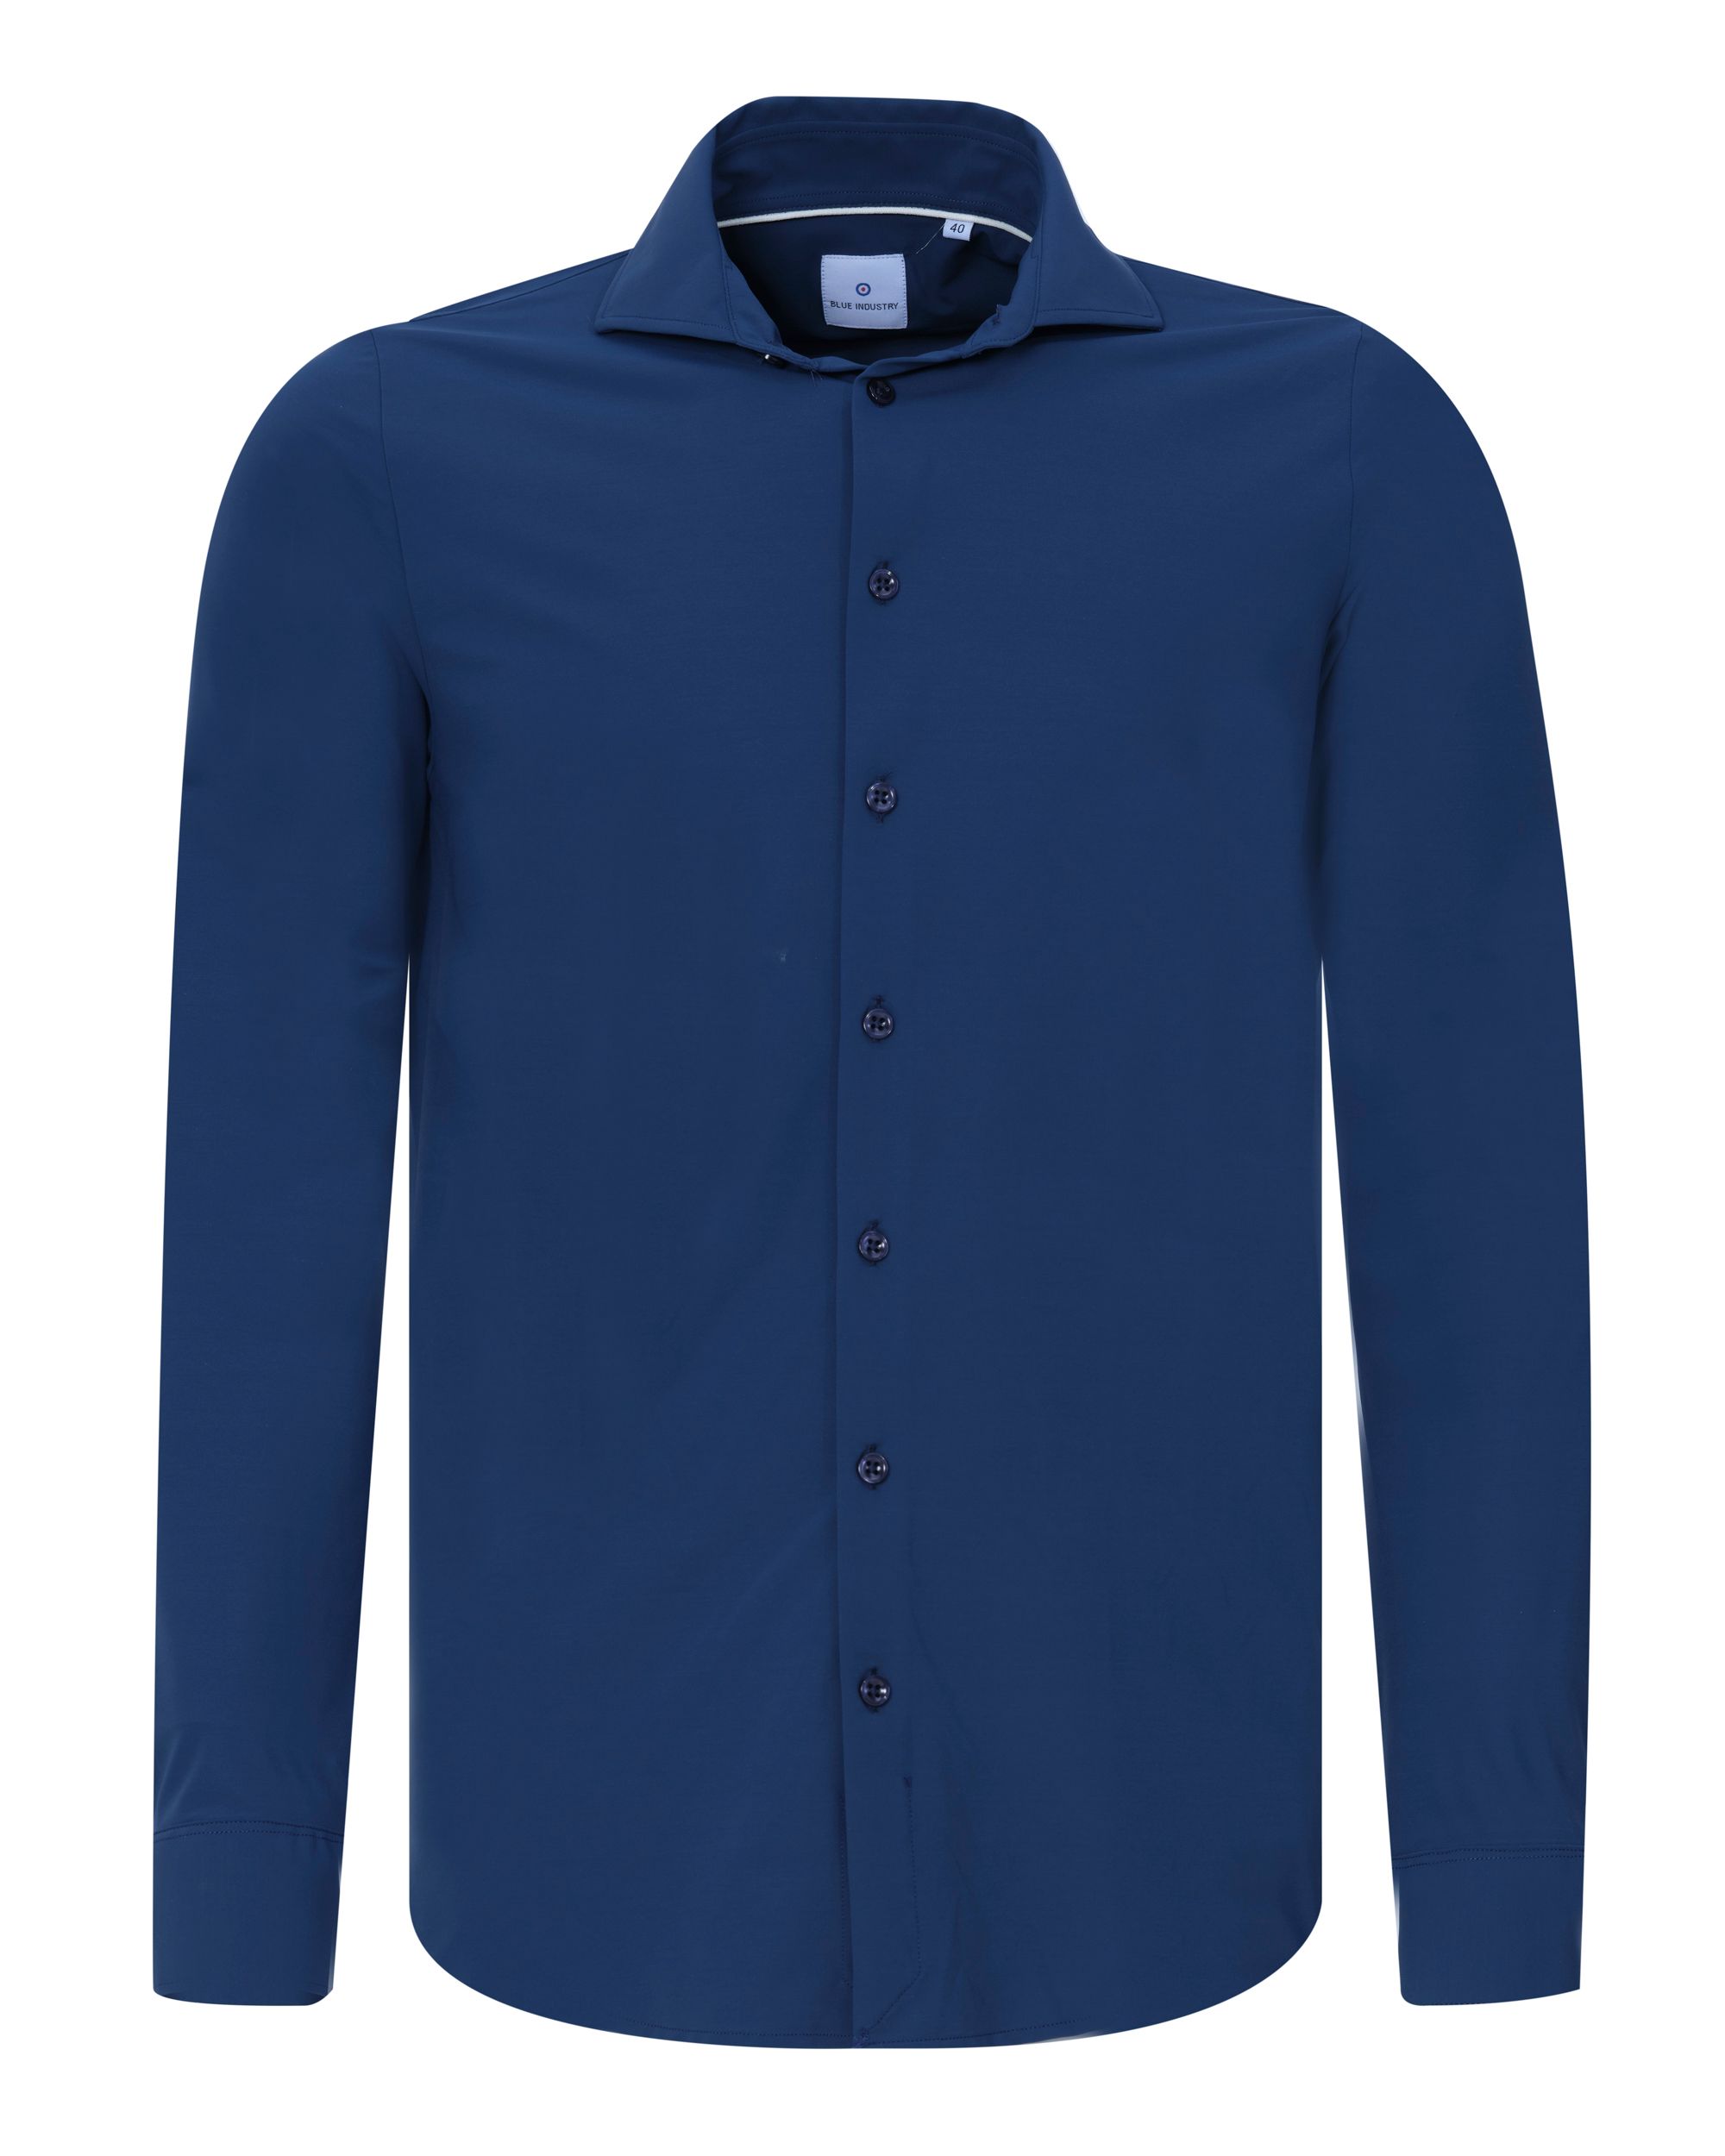 Blue Industry Casual Overhemd LM Blauw 082714-001-37